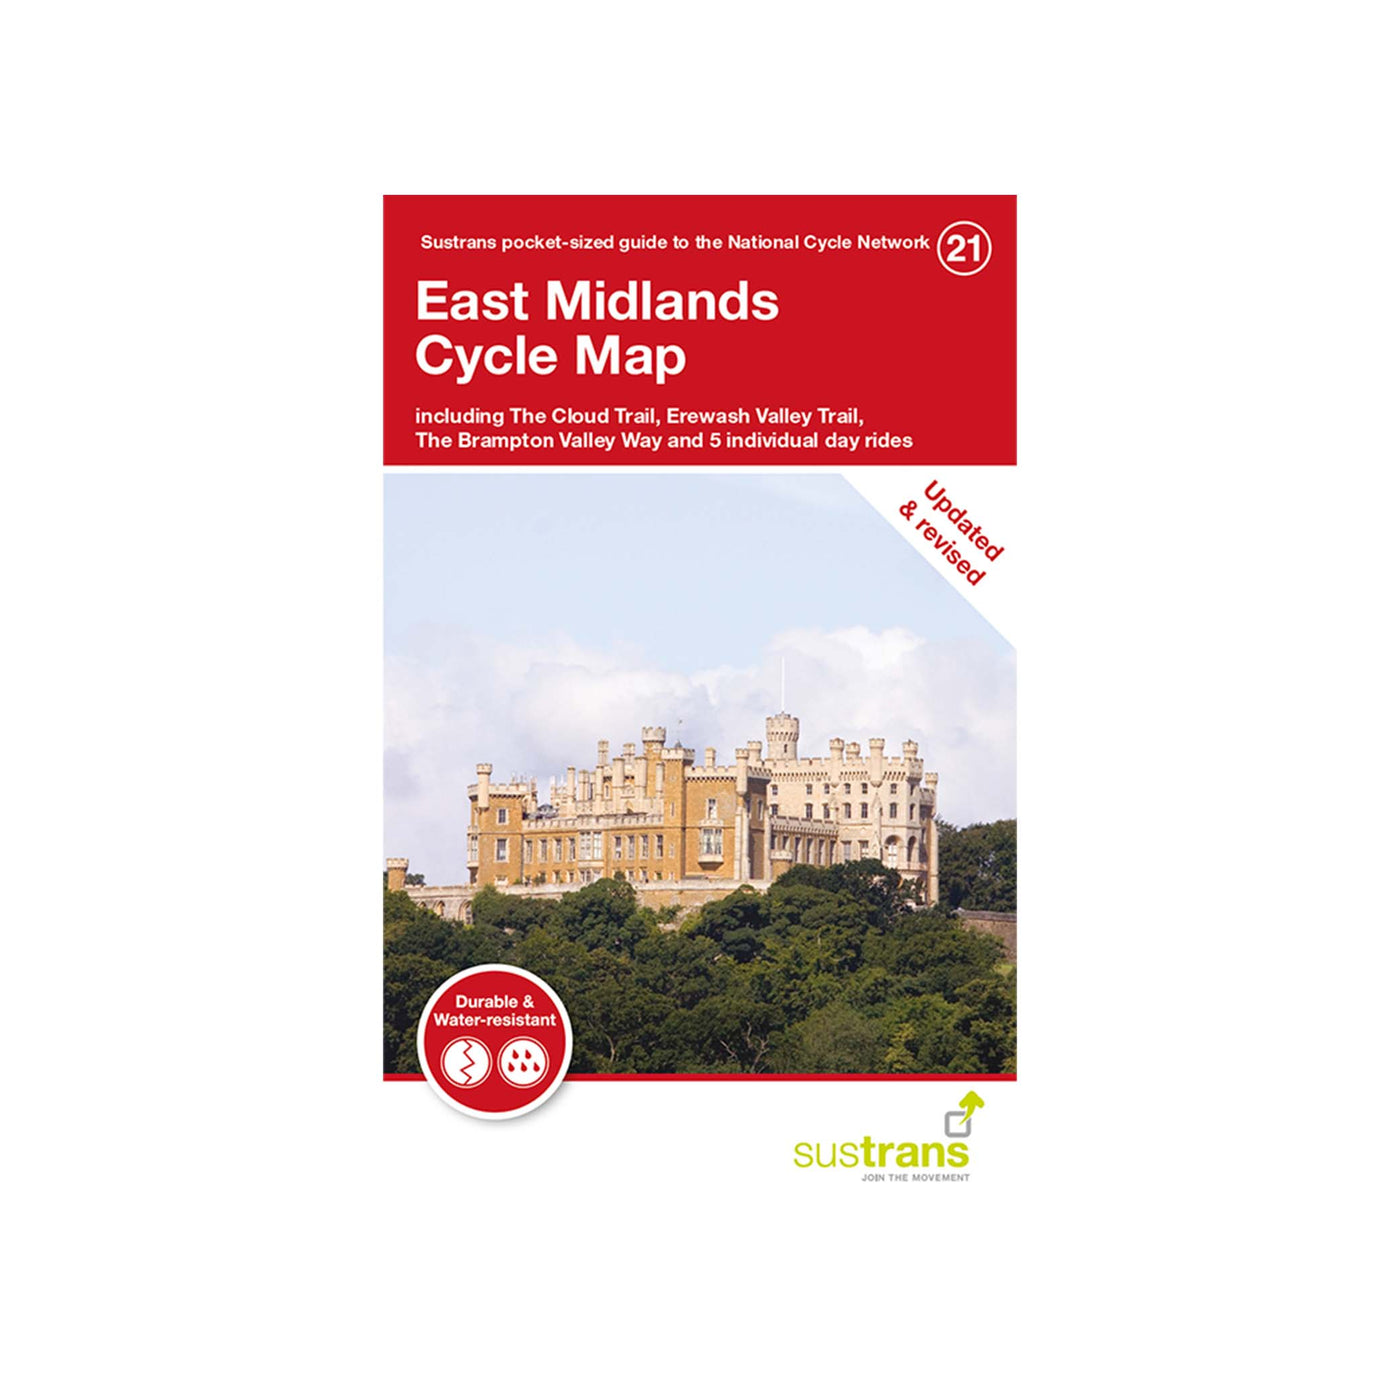 East Midlands Cycle Map (21)